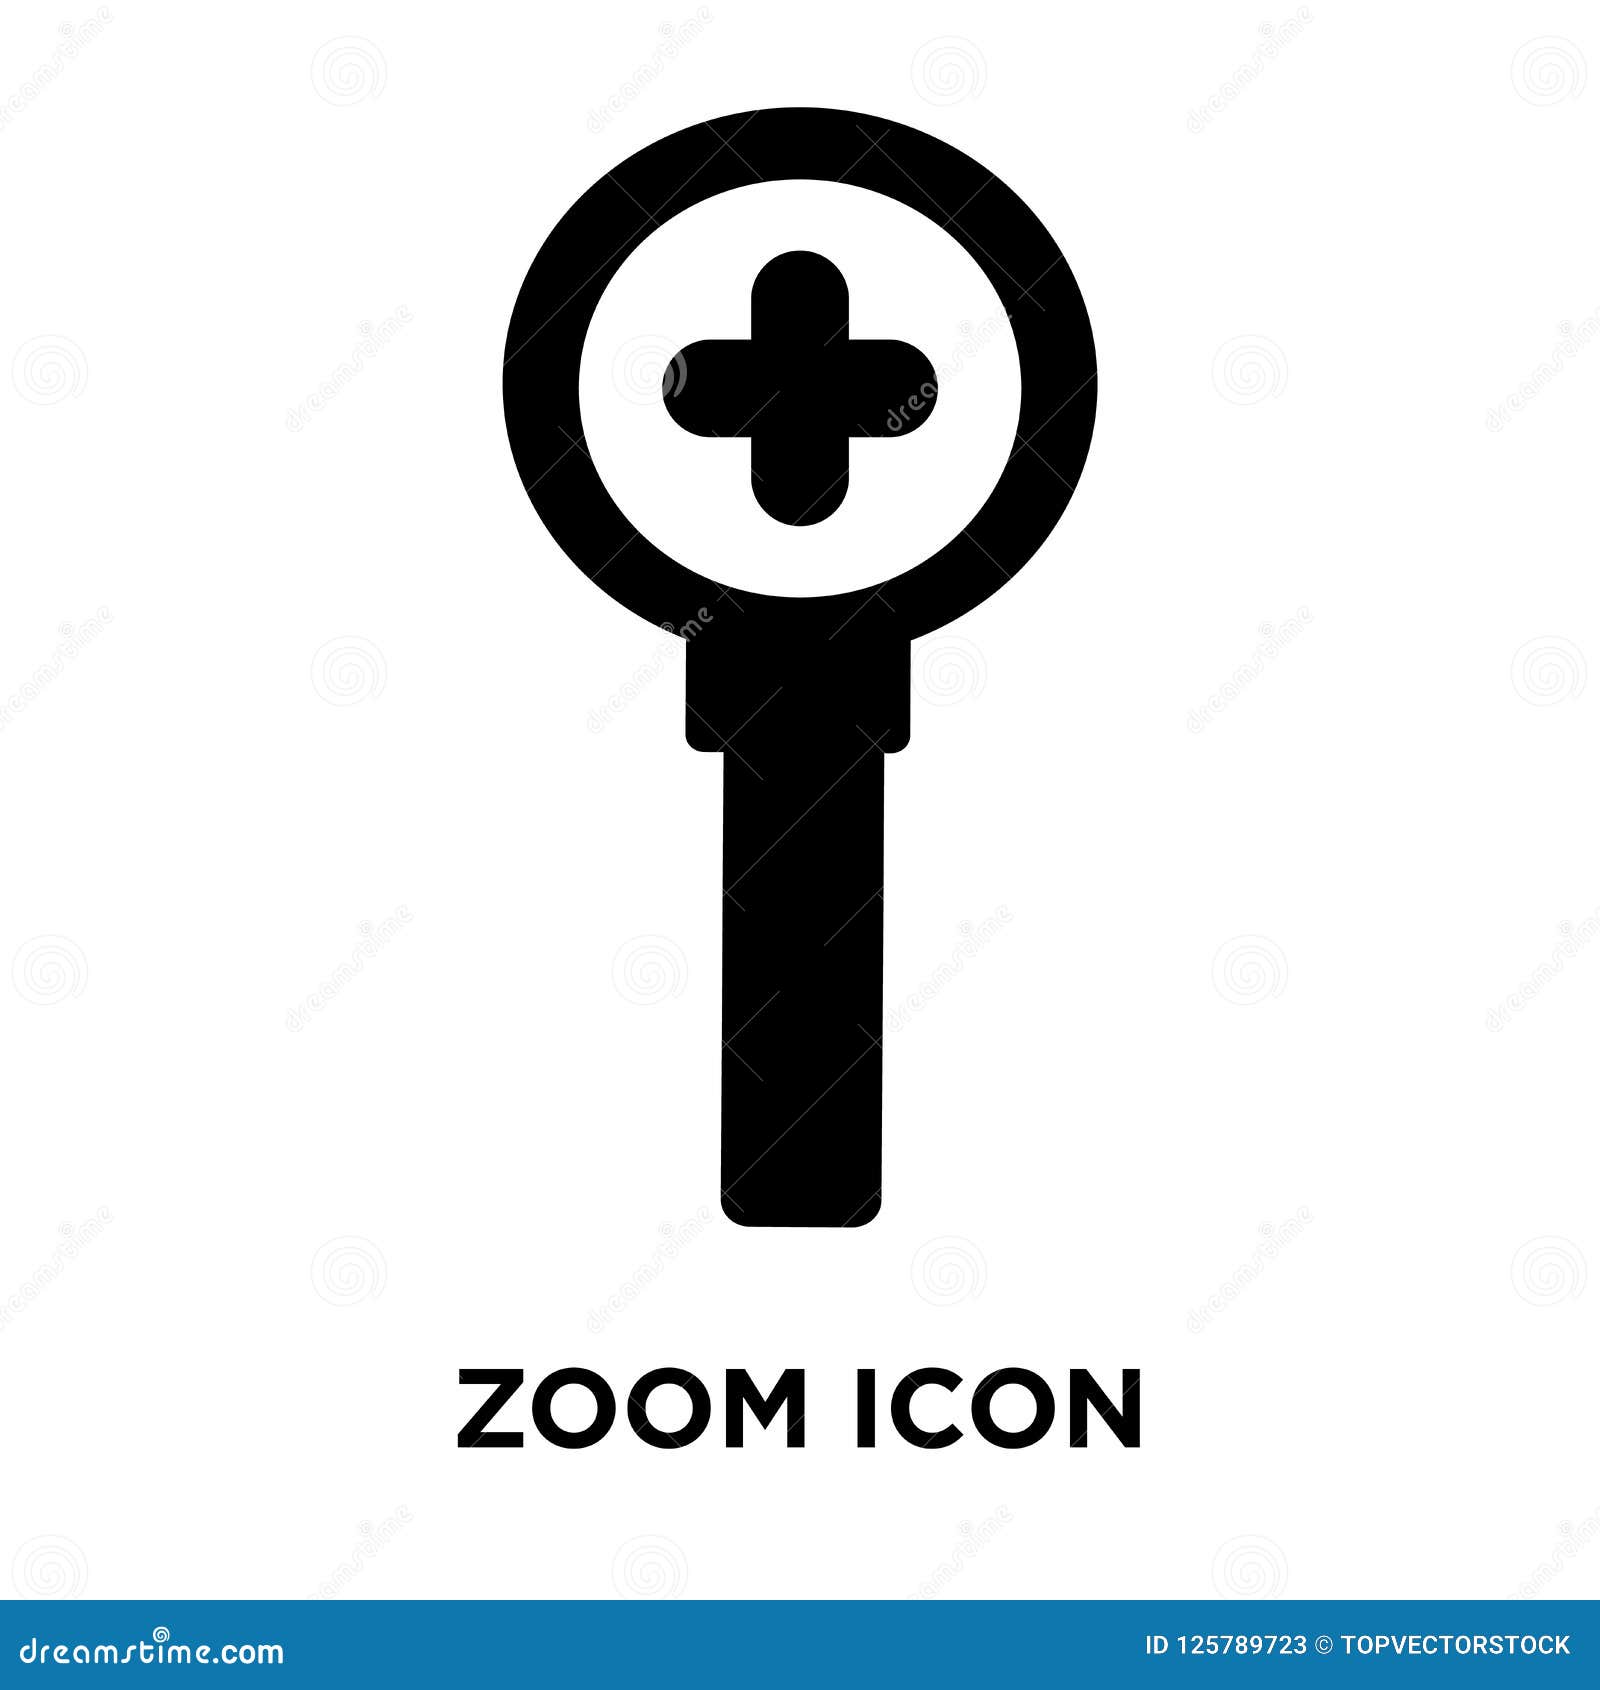 Zoom Icon Vector Isolated On White Background, Logo ...